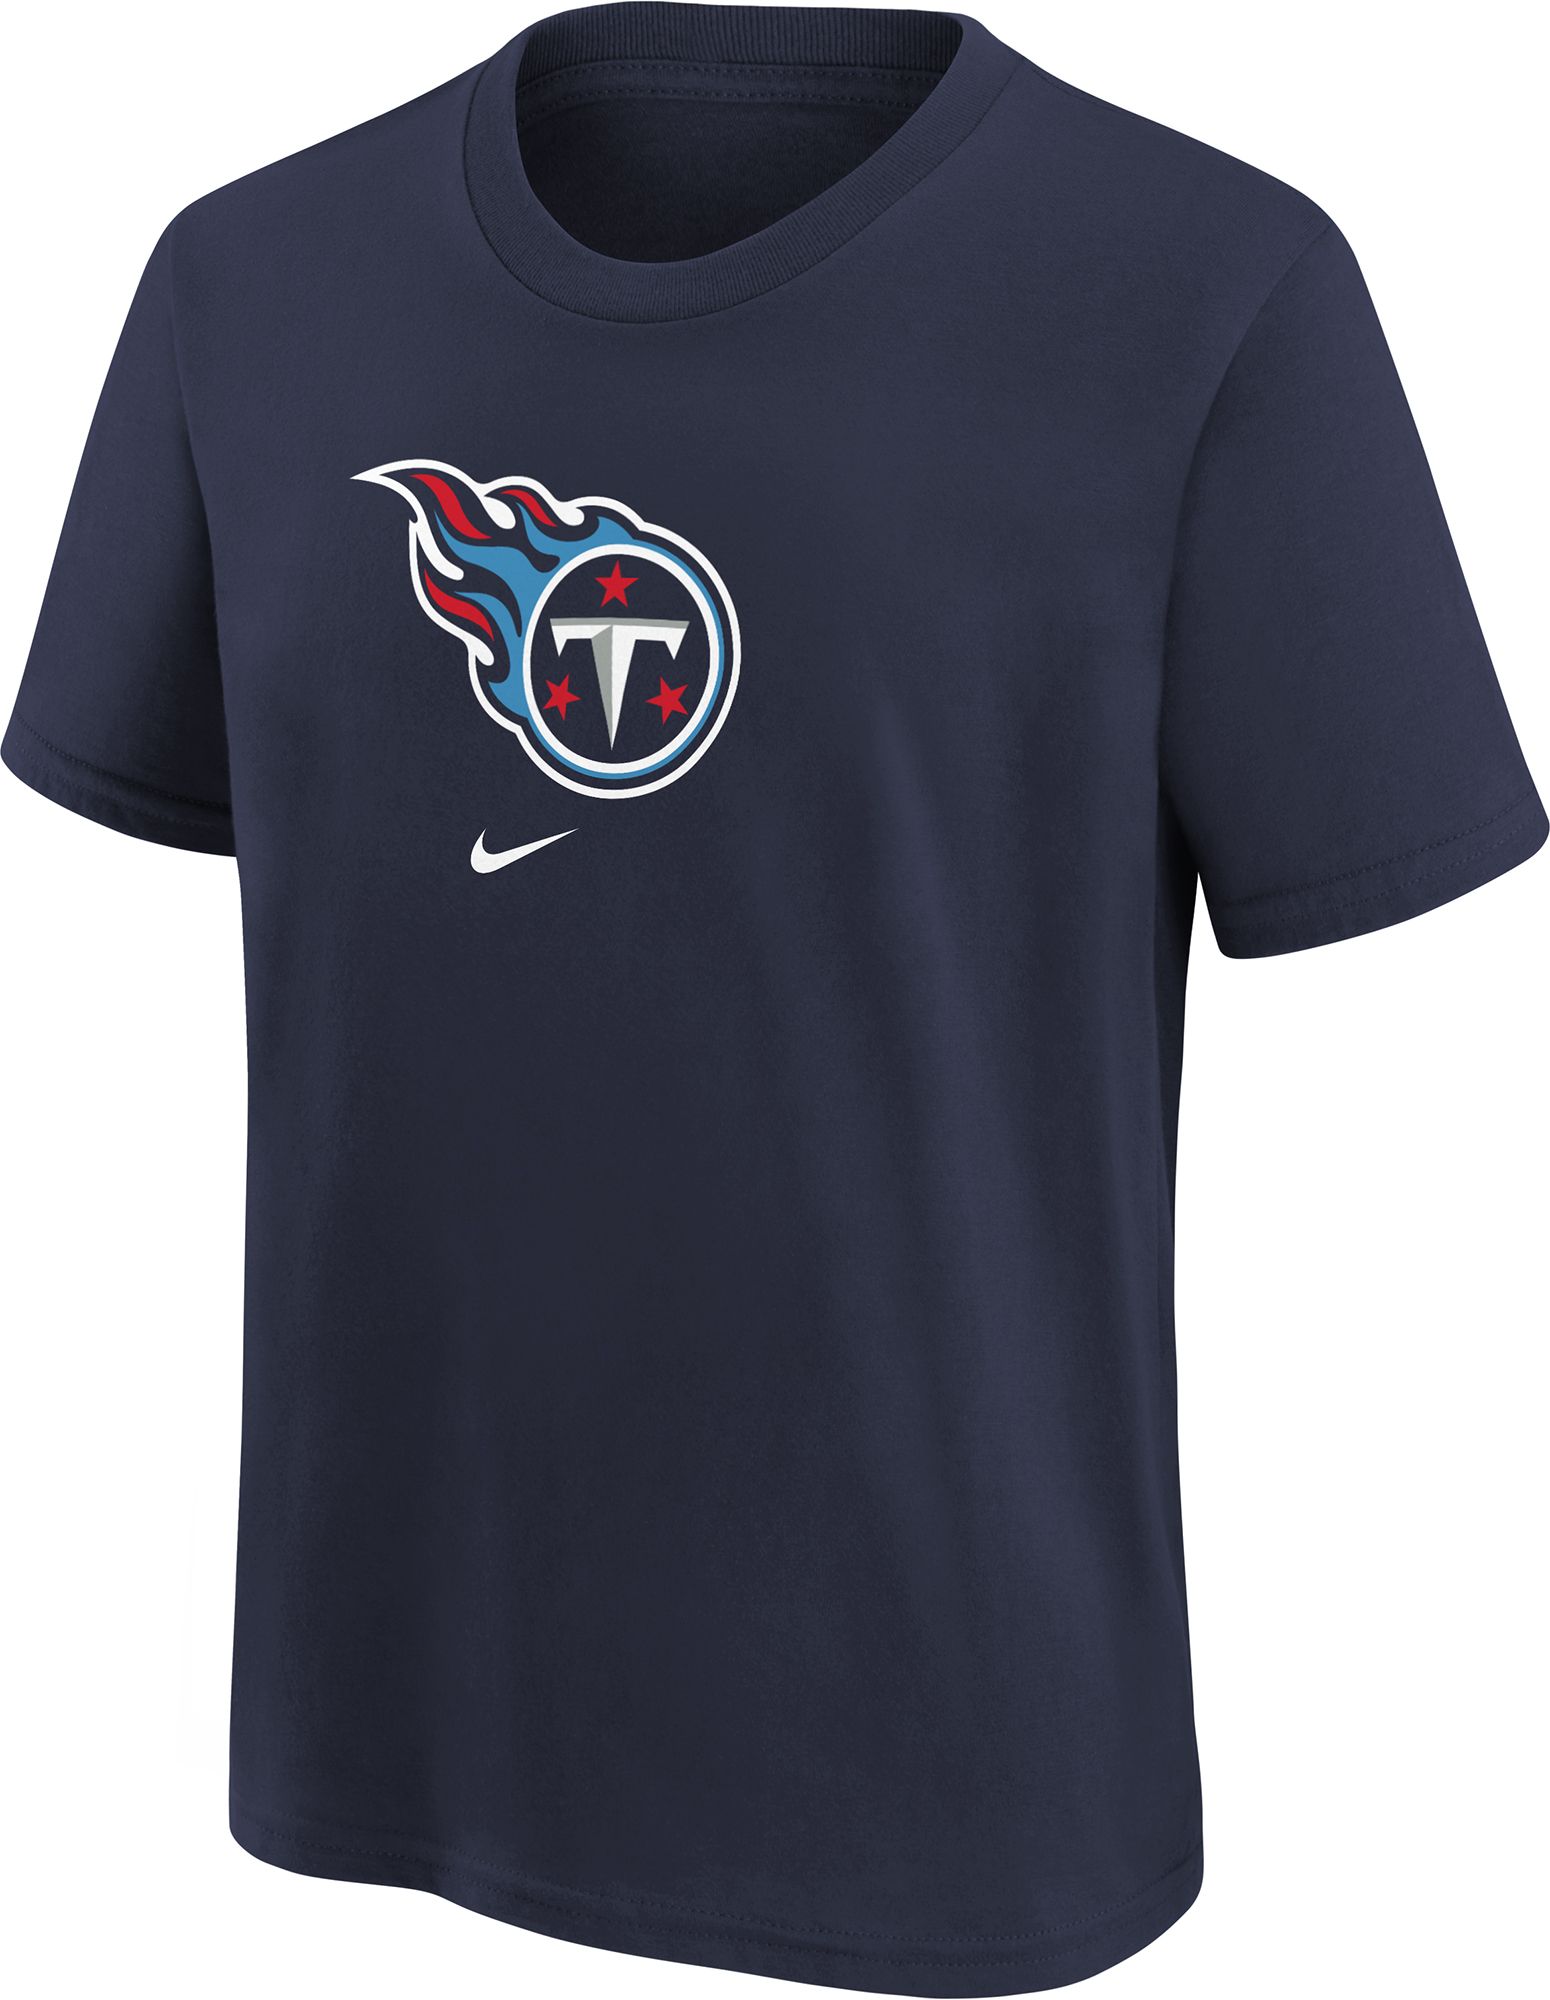 Nike Youth Tennessee Titans Logo Navy Cotton T-Shirt